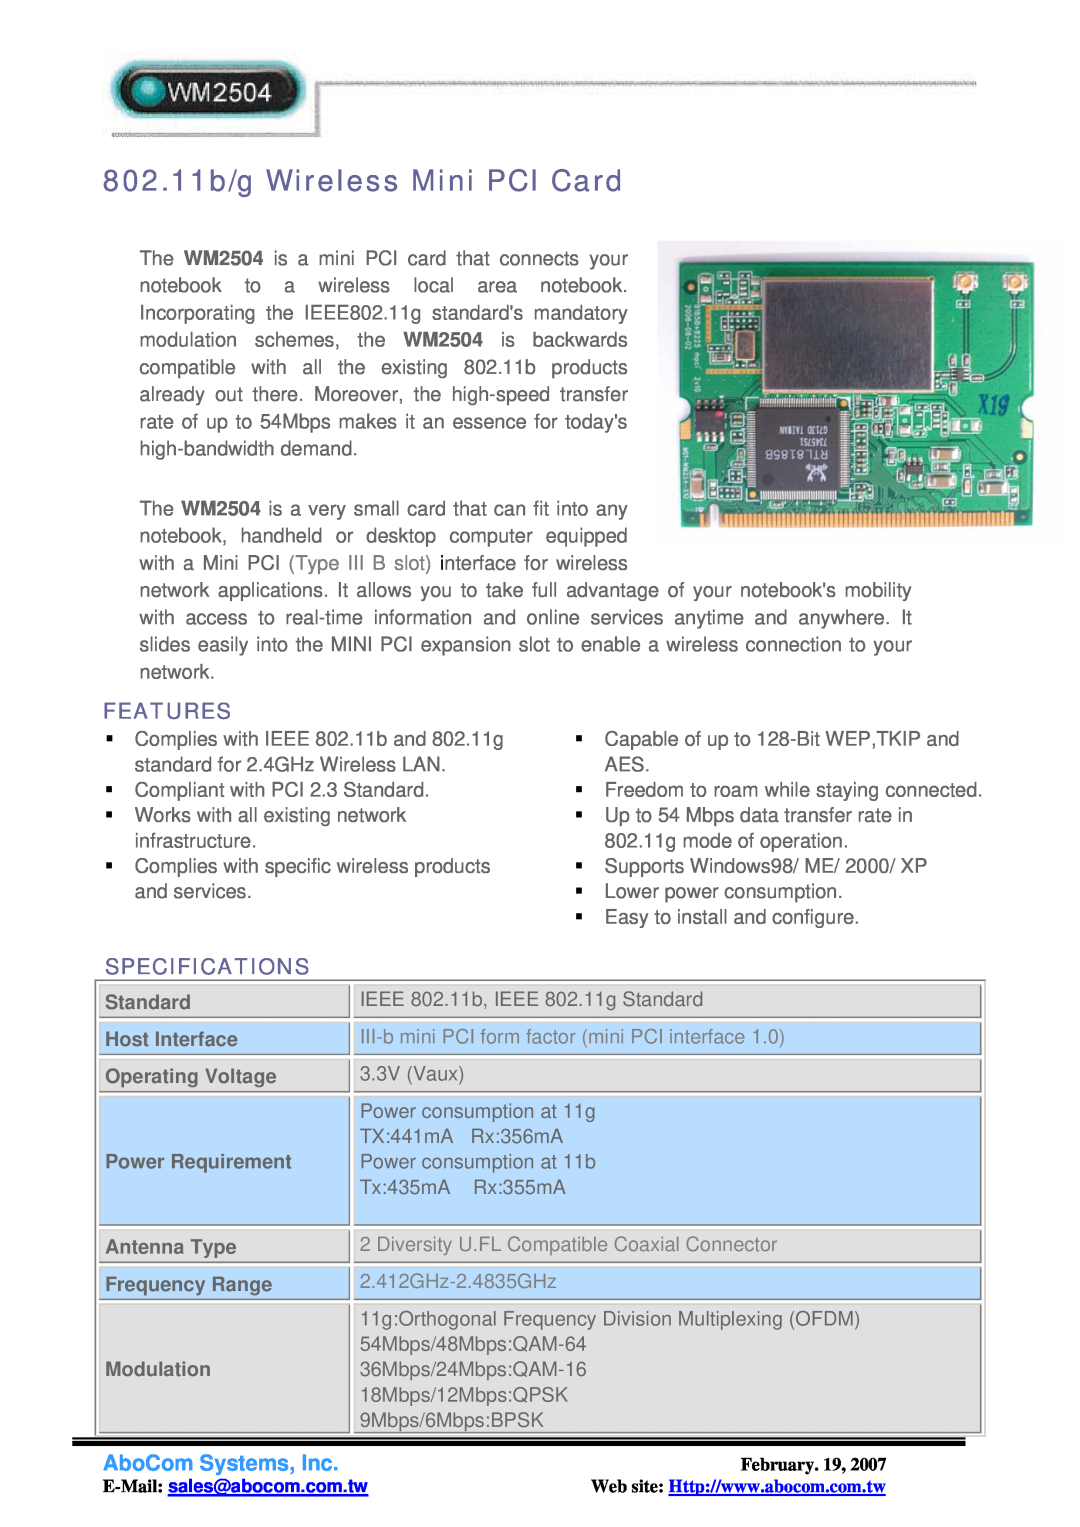 Abocom WM2504 specifications AboCom Systems, Inc, Standard, Host Interface, Operating Voltage, Power Requirement, Features 